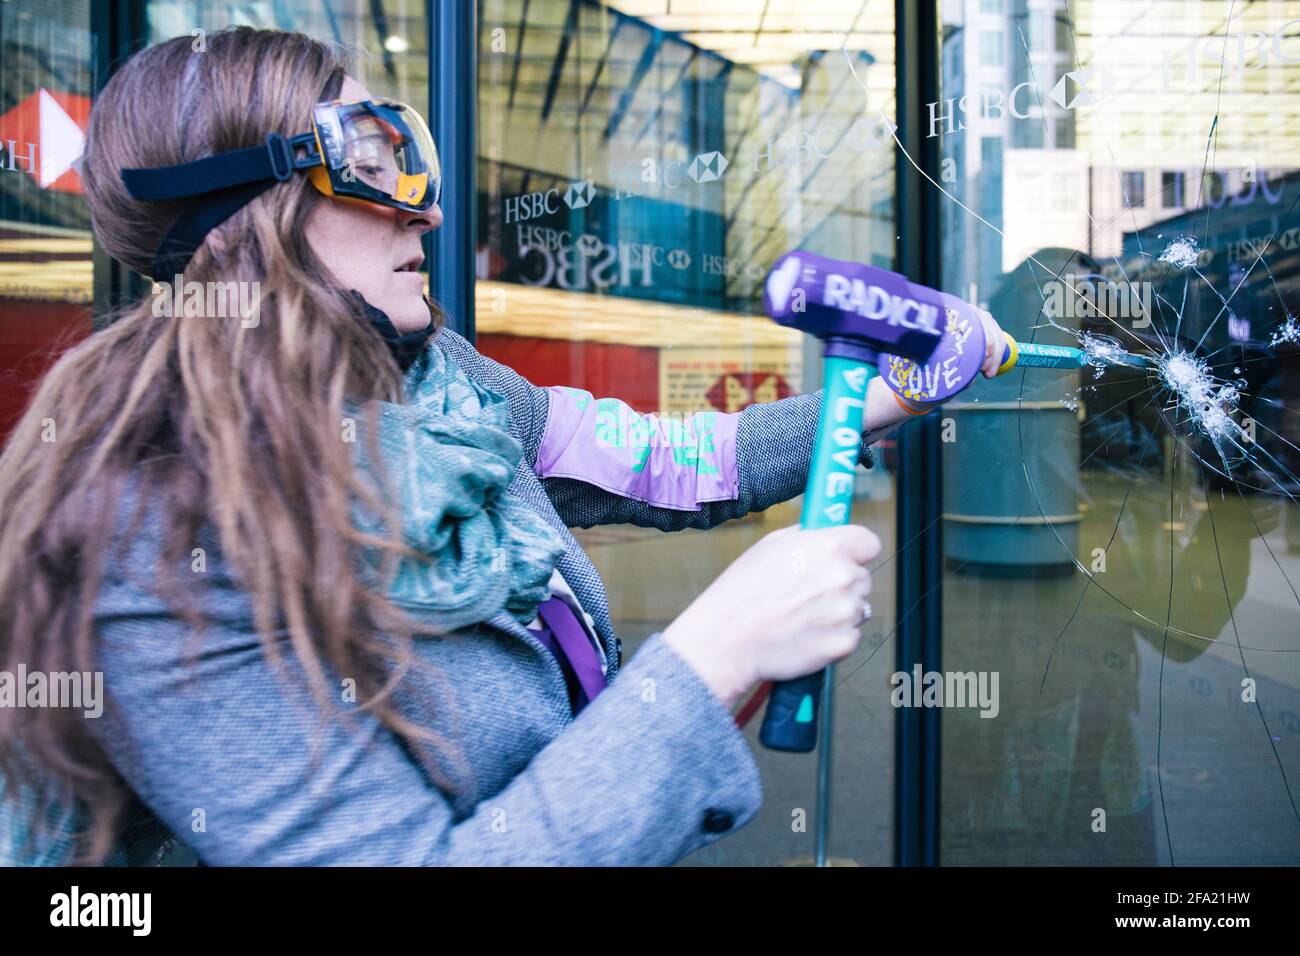 Canary Wharf, London, UK 22nd April 2021 Extinction Rebellion women break windows at HSBC bank as part of a series of actions making up the money rebellion. The environmental group are angry at the bank's 80 billion pound investment in fossil fuels over the past 5 years Stock Photo